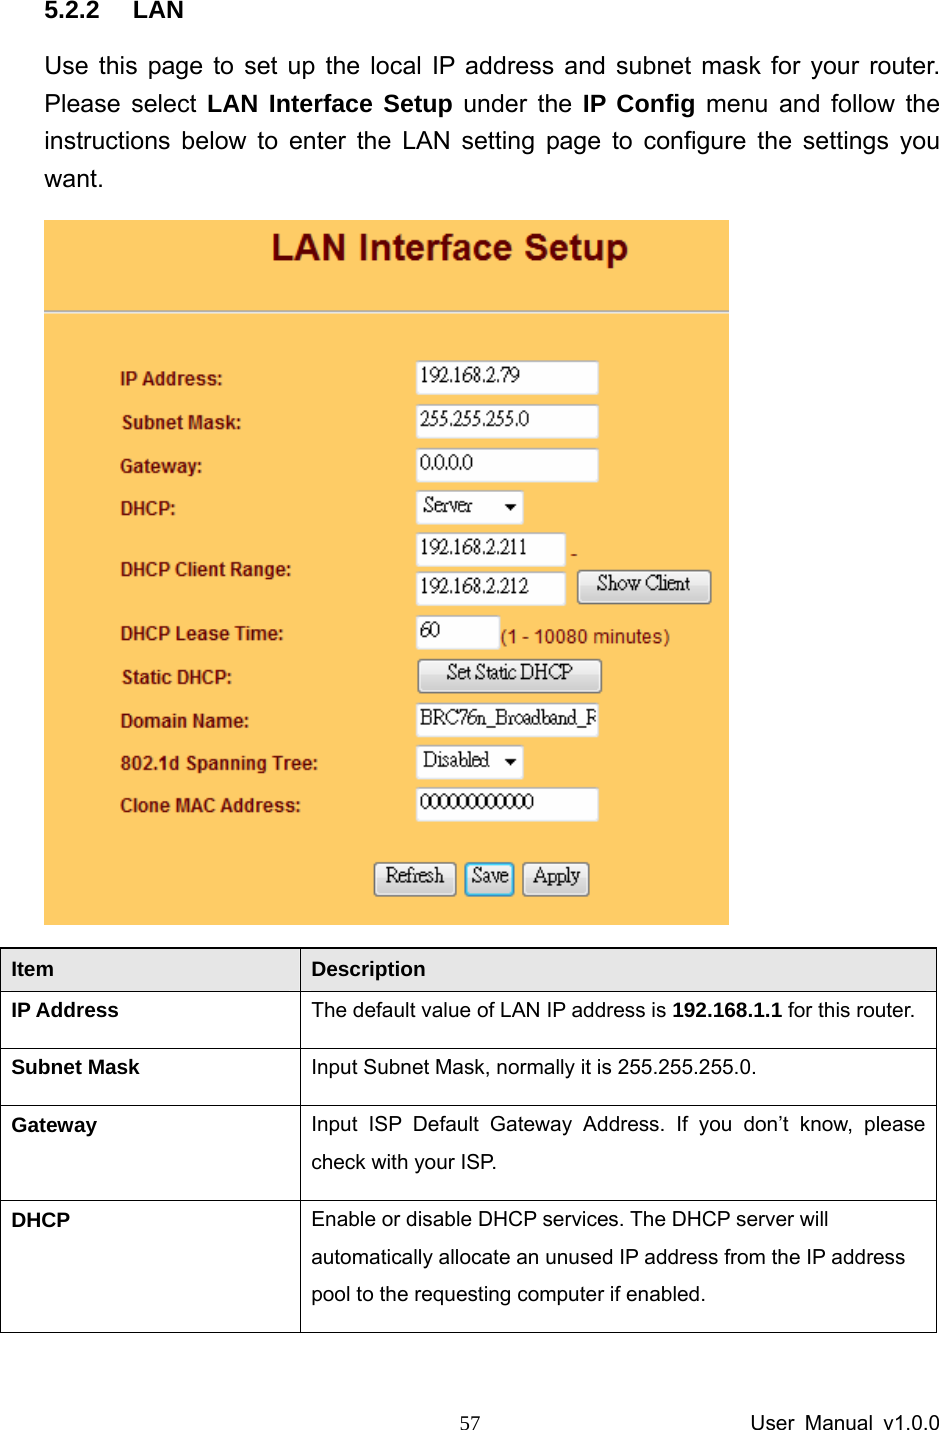                 User Manual v1.0.0 57 5.2.2 LAN Use this page to set up the local IP address and subnet mask for your router. Please select LAN Interface Setup under the IP Config menu and follow the instructions below to enter the LAN setting page to configure the settings you want.  Item  Description IP Address  The default value of LAN IP address is 192.168.1.1 for this router. Subnet Mask  Input Subnet Mask, normally it is 255.255.255.0. Gateway  Input ISP Default Gateway Address. If you don’t know, please check with your ISP. DHCP  Enable or disable DHCP services. The DHCP server will automatically allocate an unused IP address from the IP address pool to the requesting computer if enabled. 